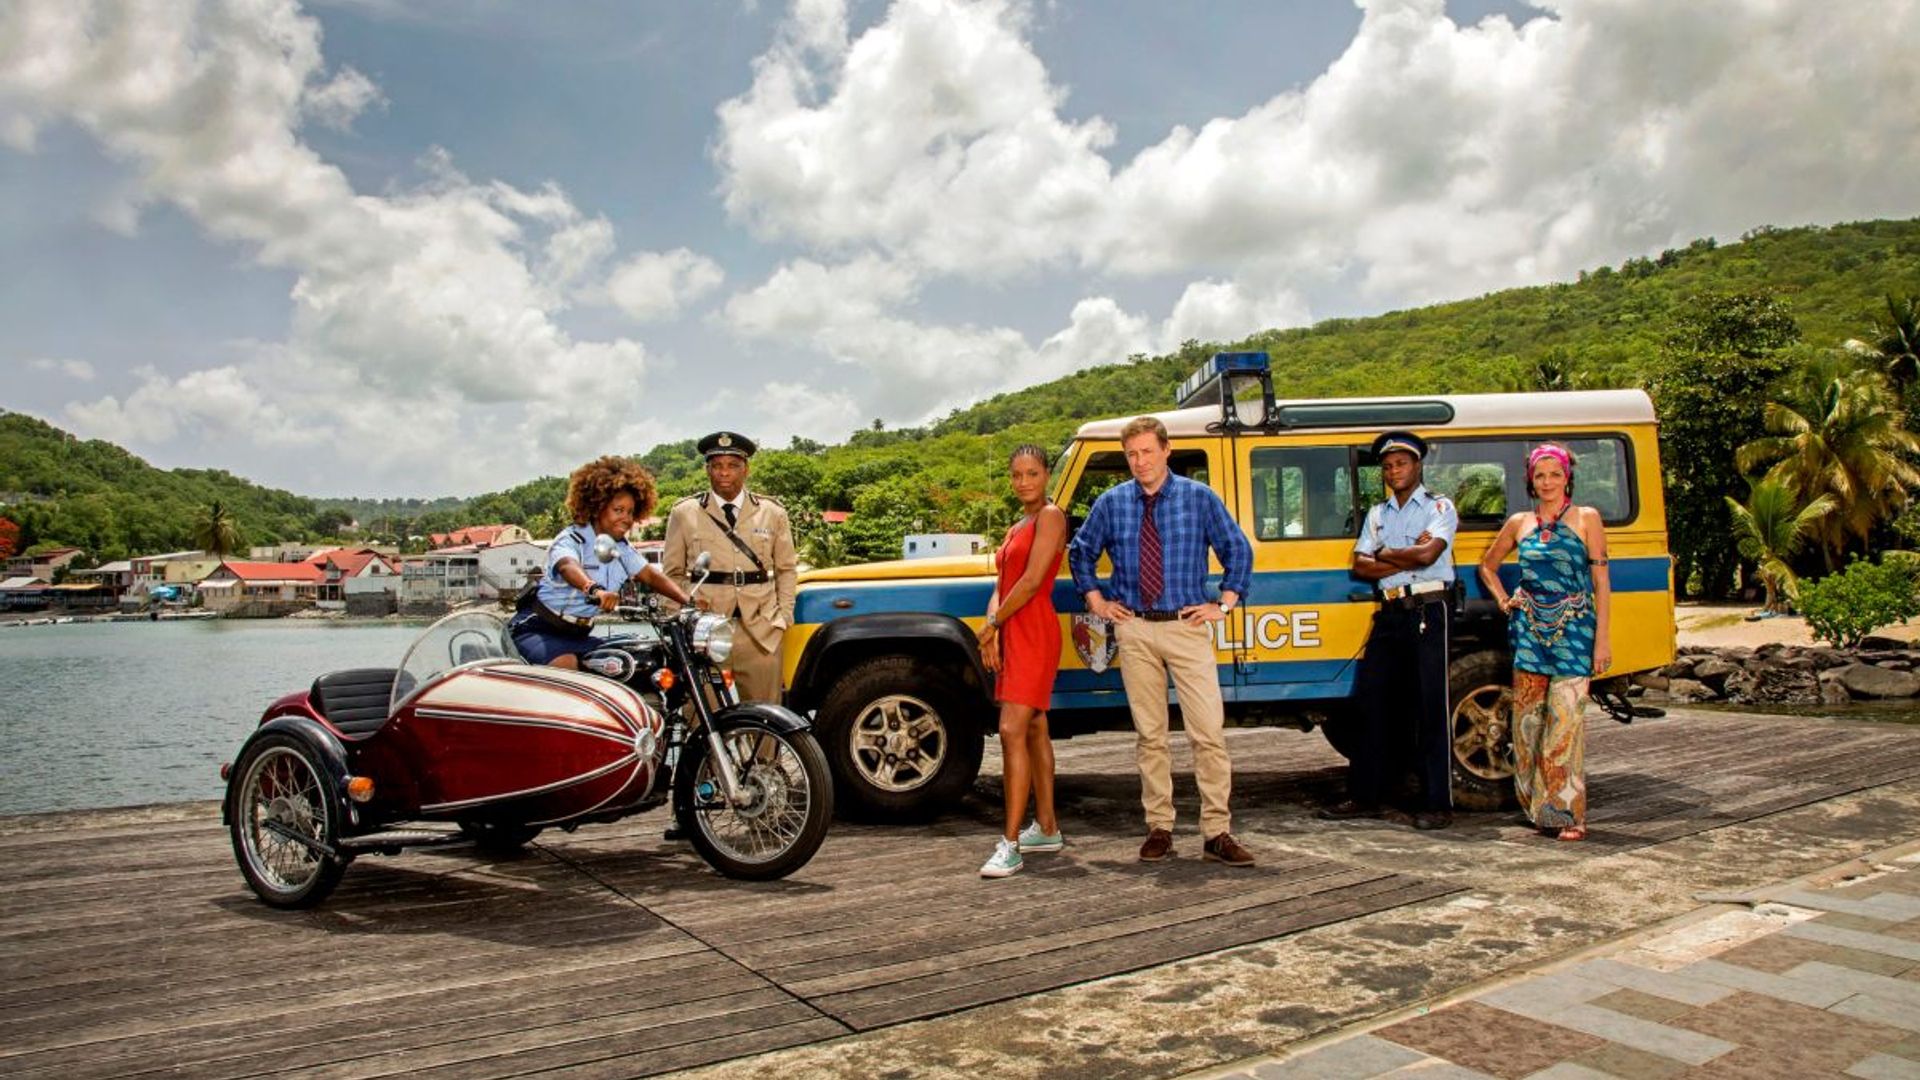 death in paradise 4